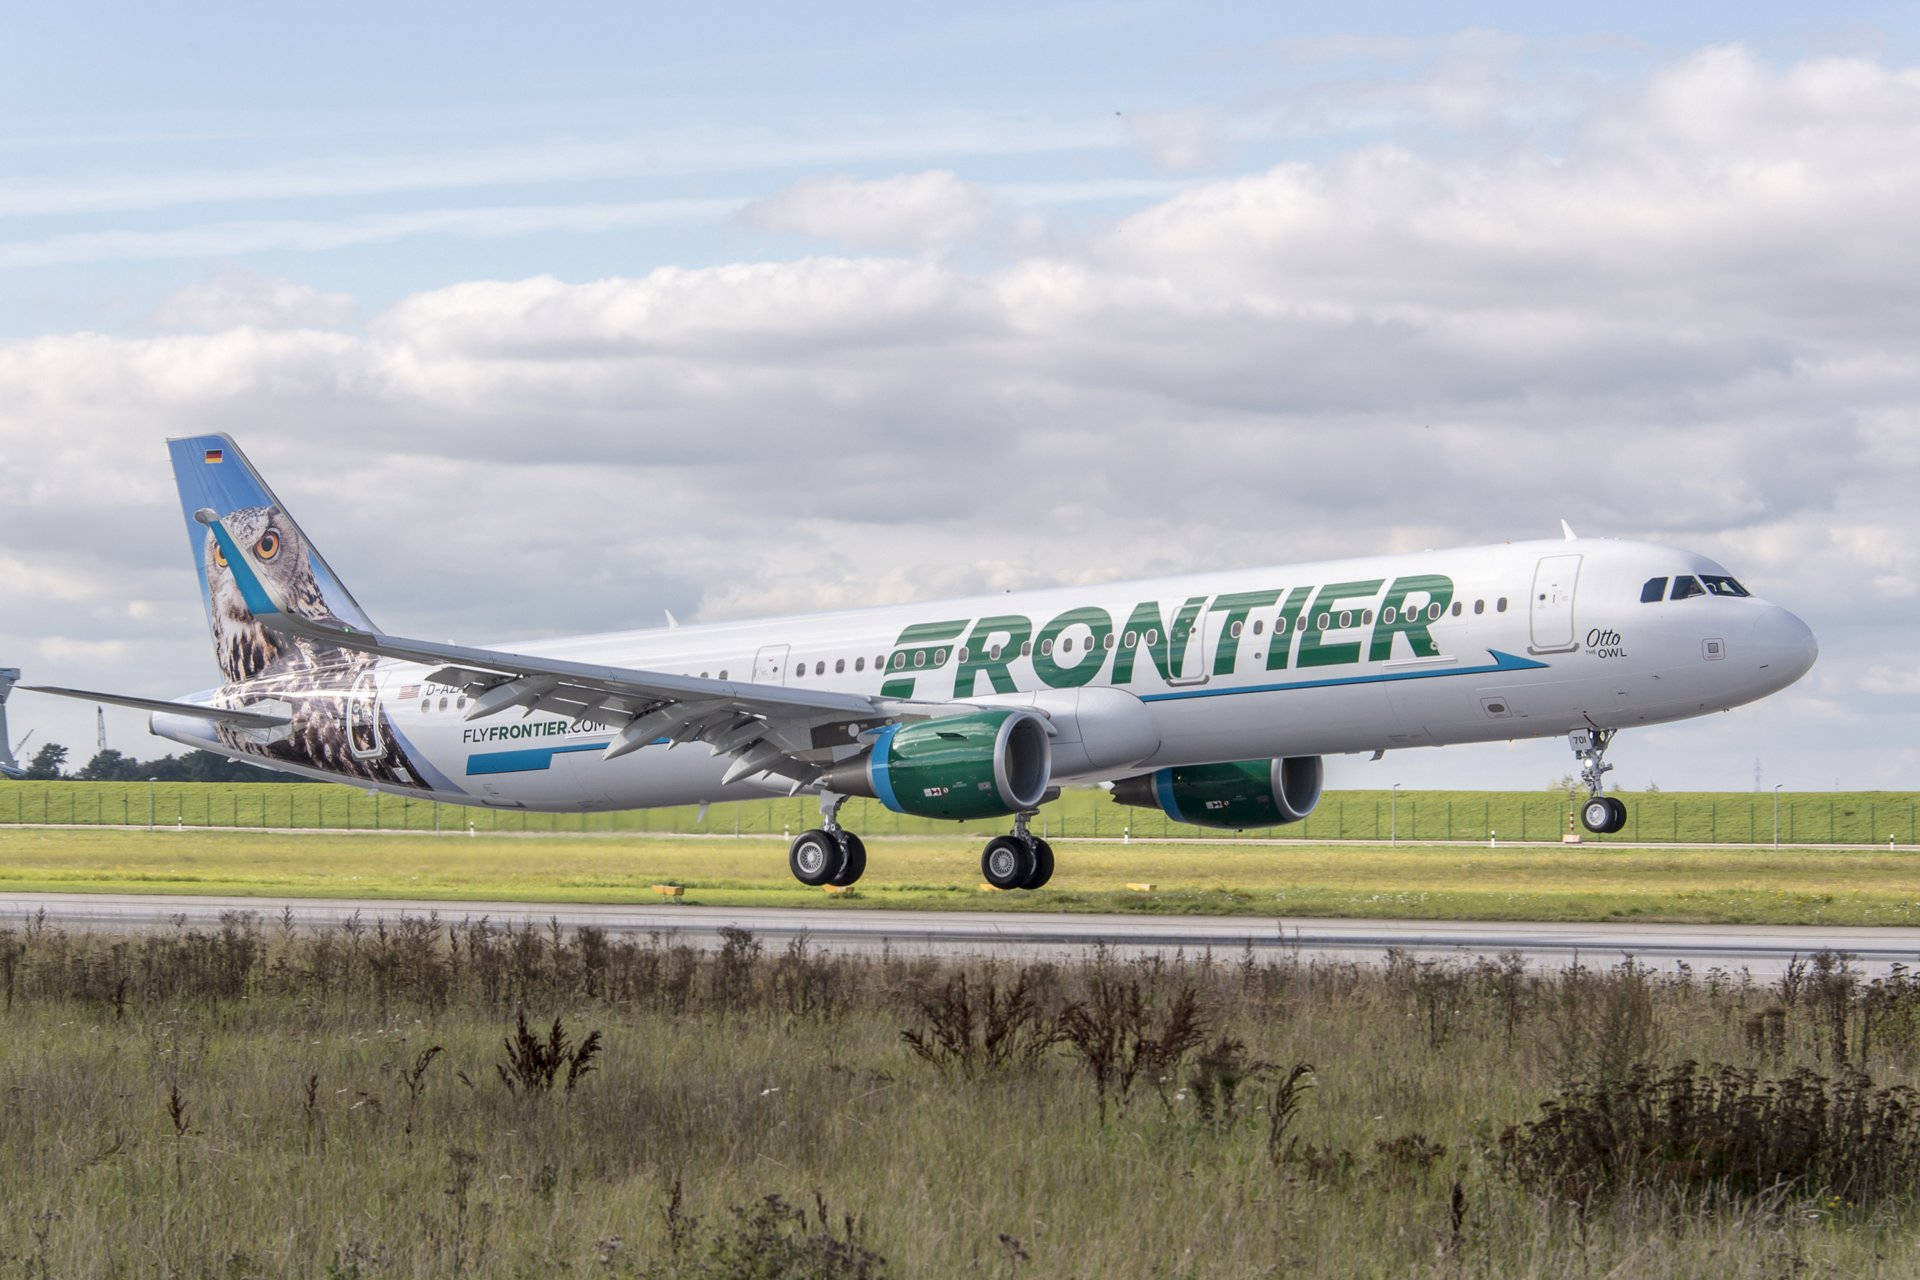 Top 999+ Frontier Airlines Wallpapers Full HD, 4K✅Free to Use